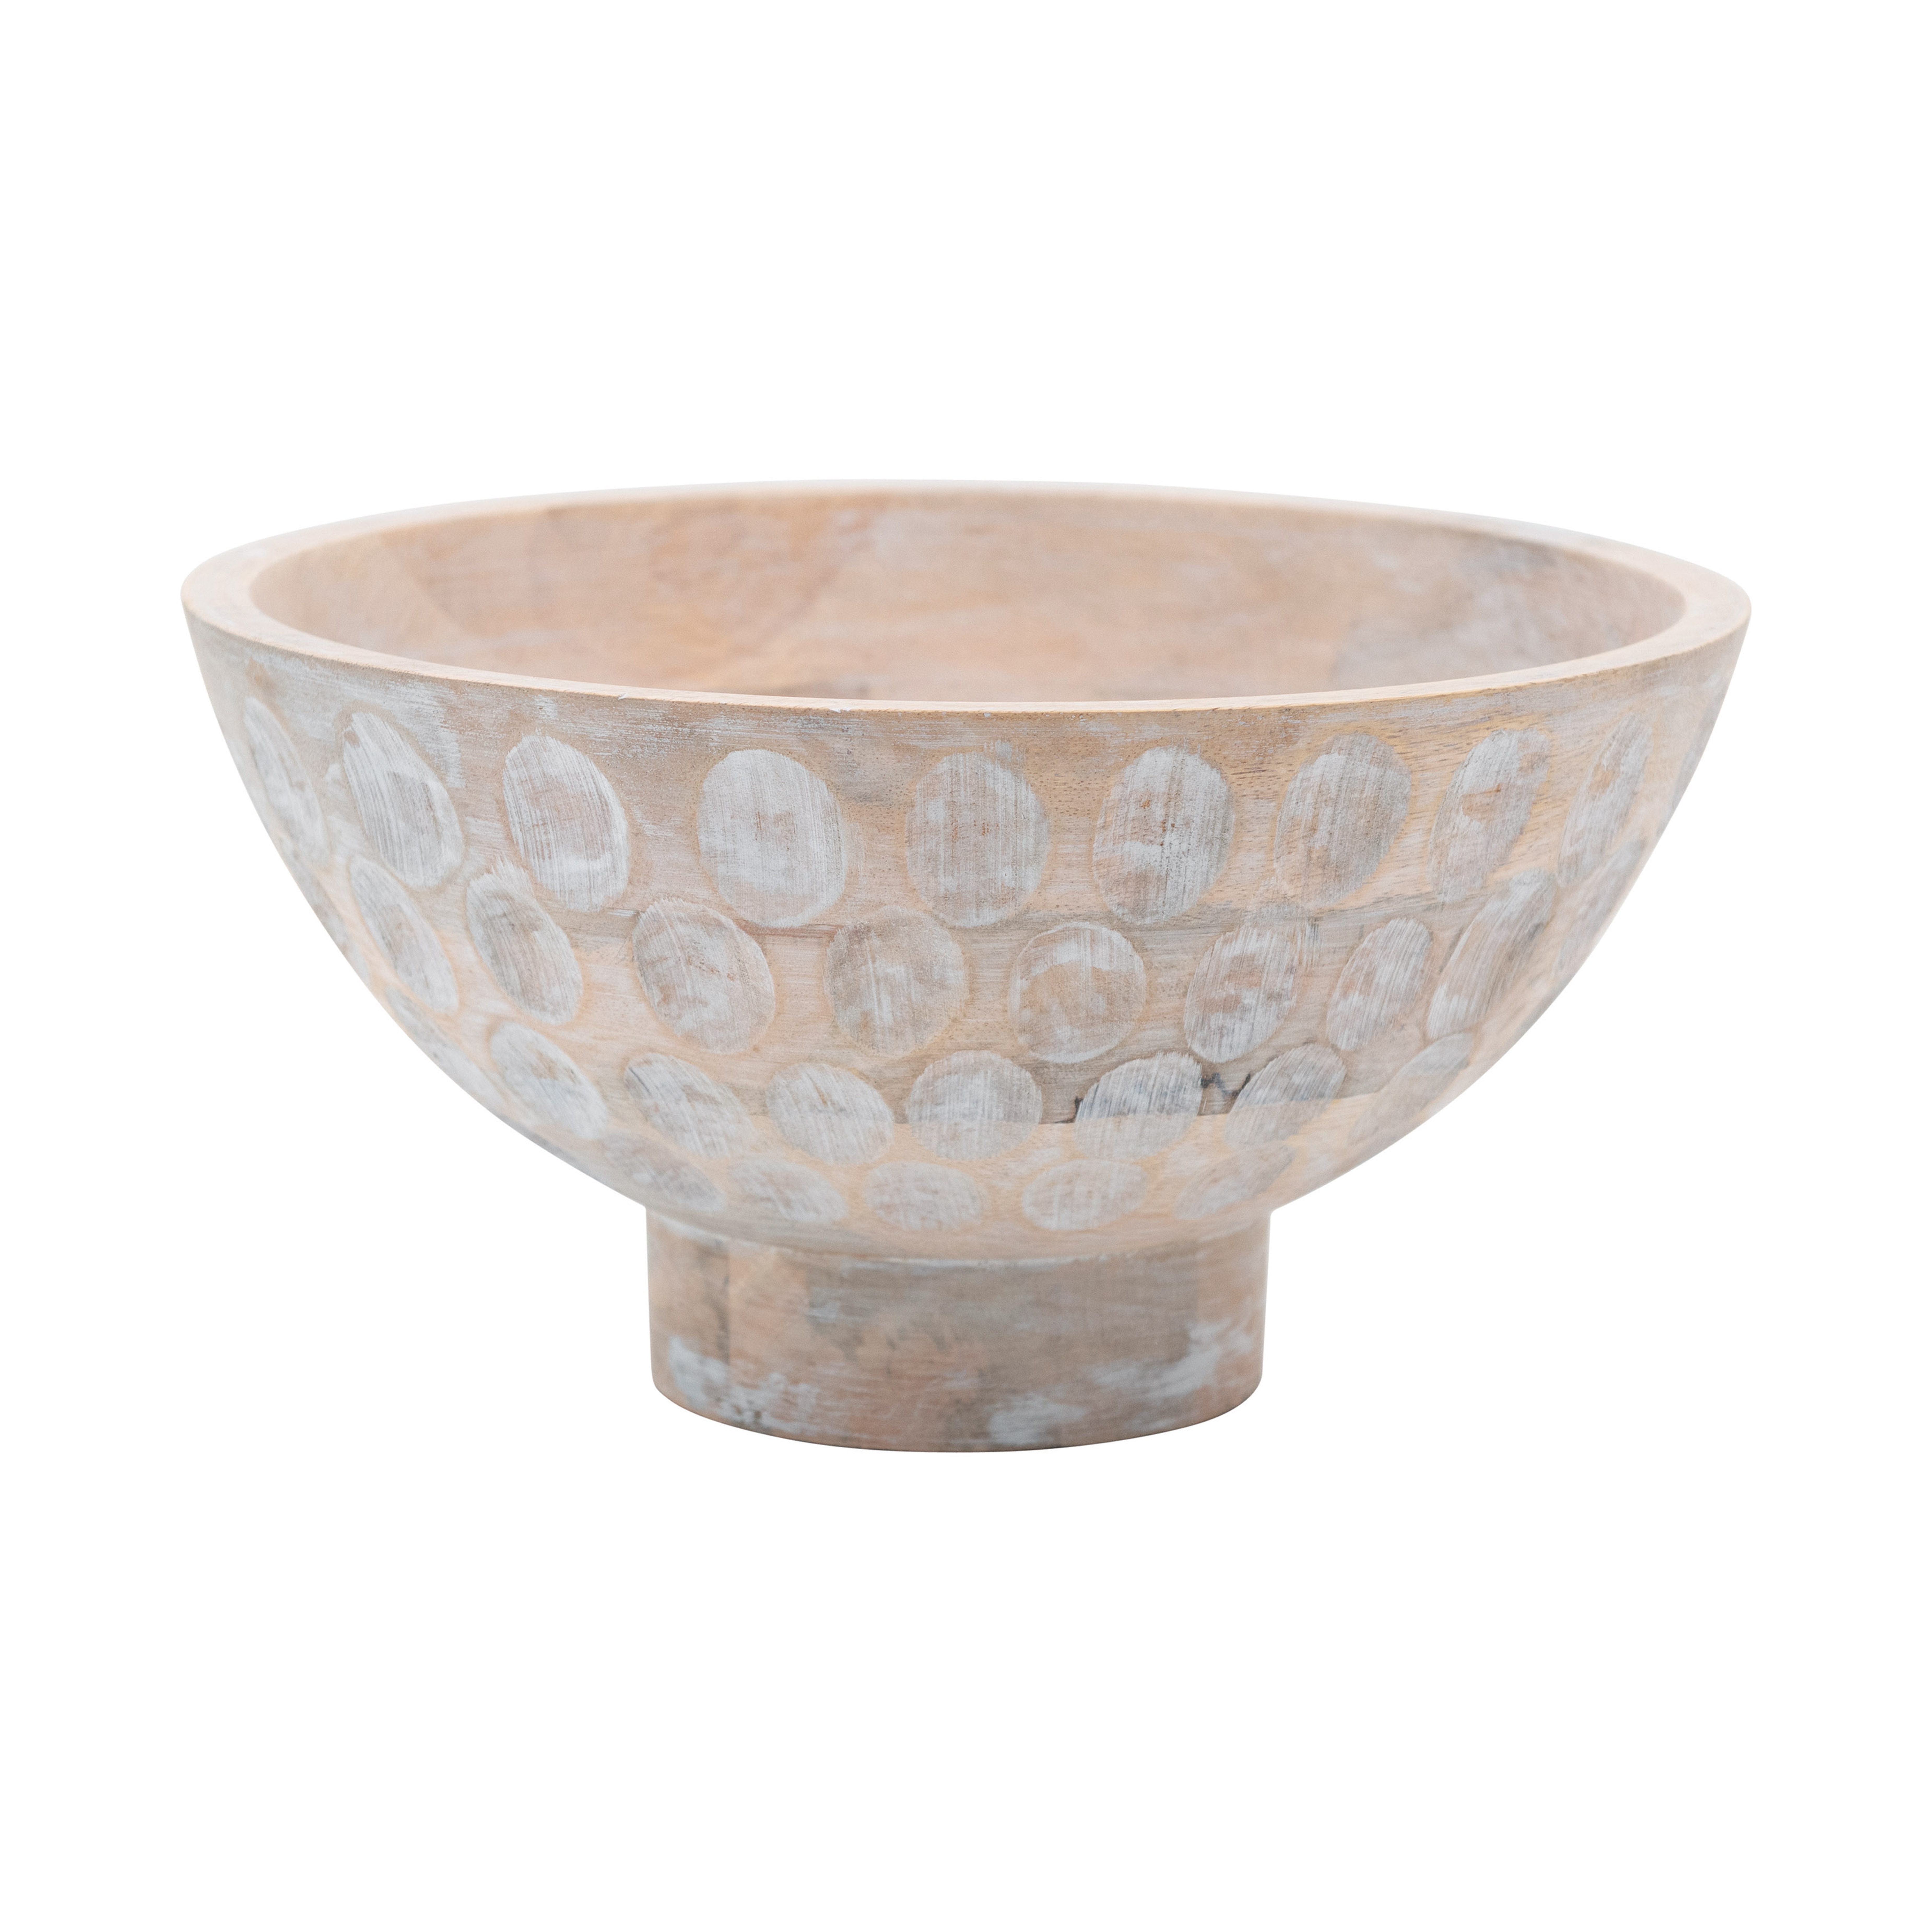 Mango Wood Footed Bowl with Carved Circle Accents and Whitewashed Finish - Nomad Home